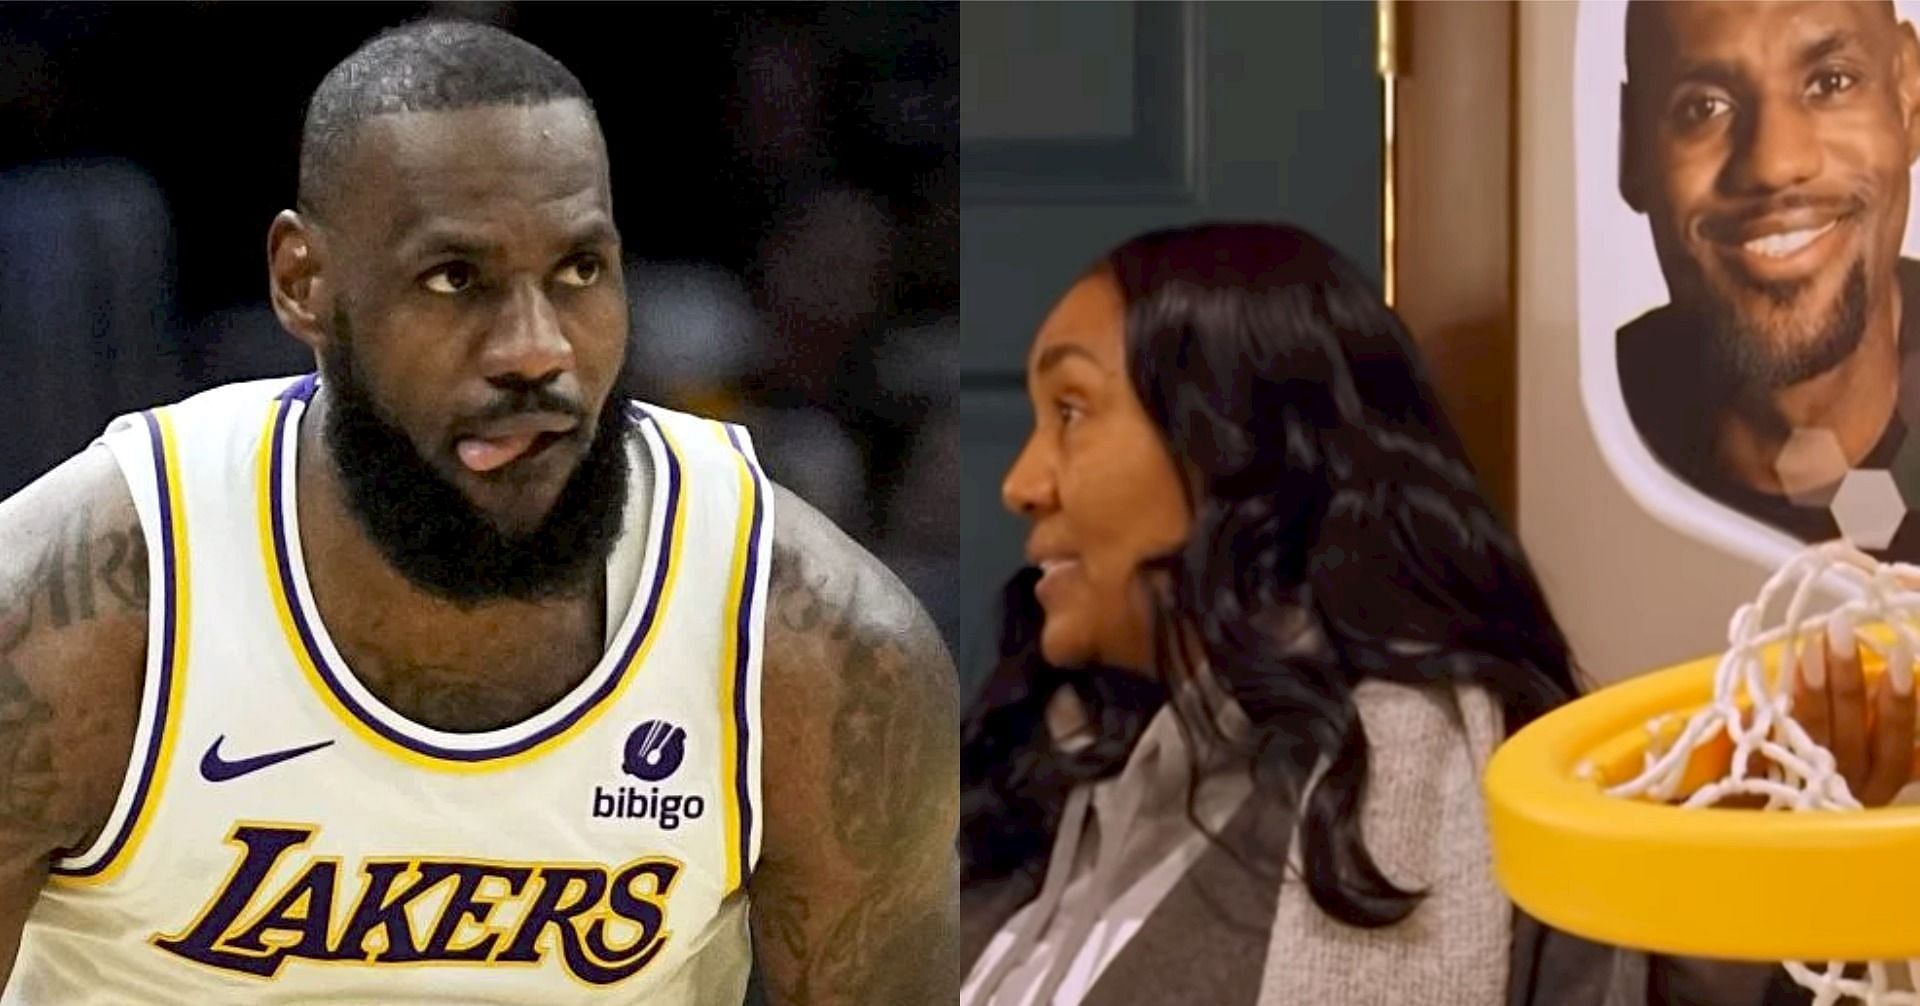 Gloria James recalls 2-year-old LeBron James crying over baby hoop being placed too low